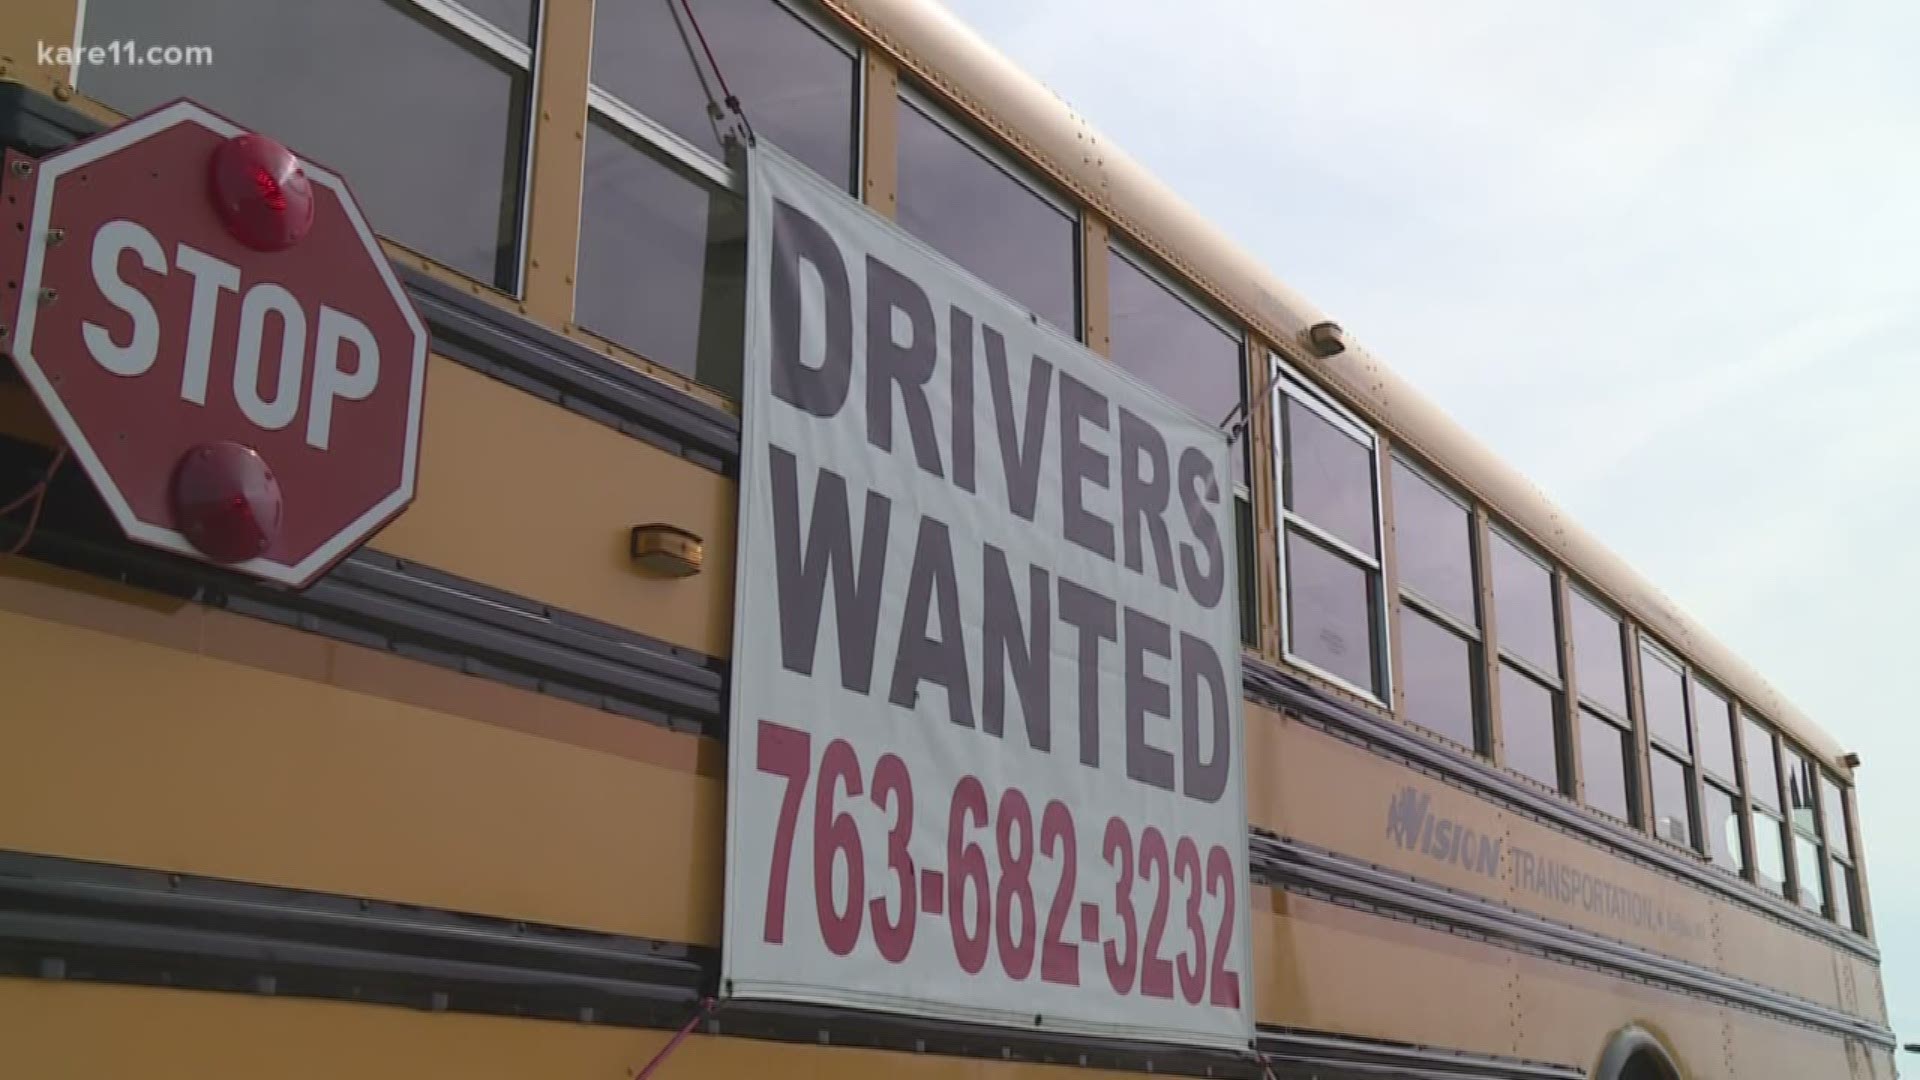 Minnesota schools are operating with bus driver shortages, and it's the students who suffer the most.